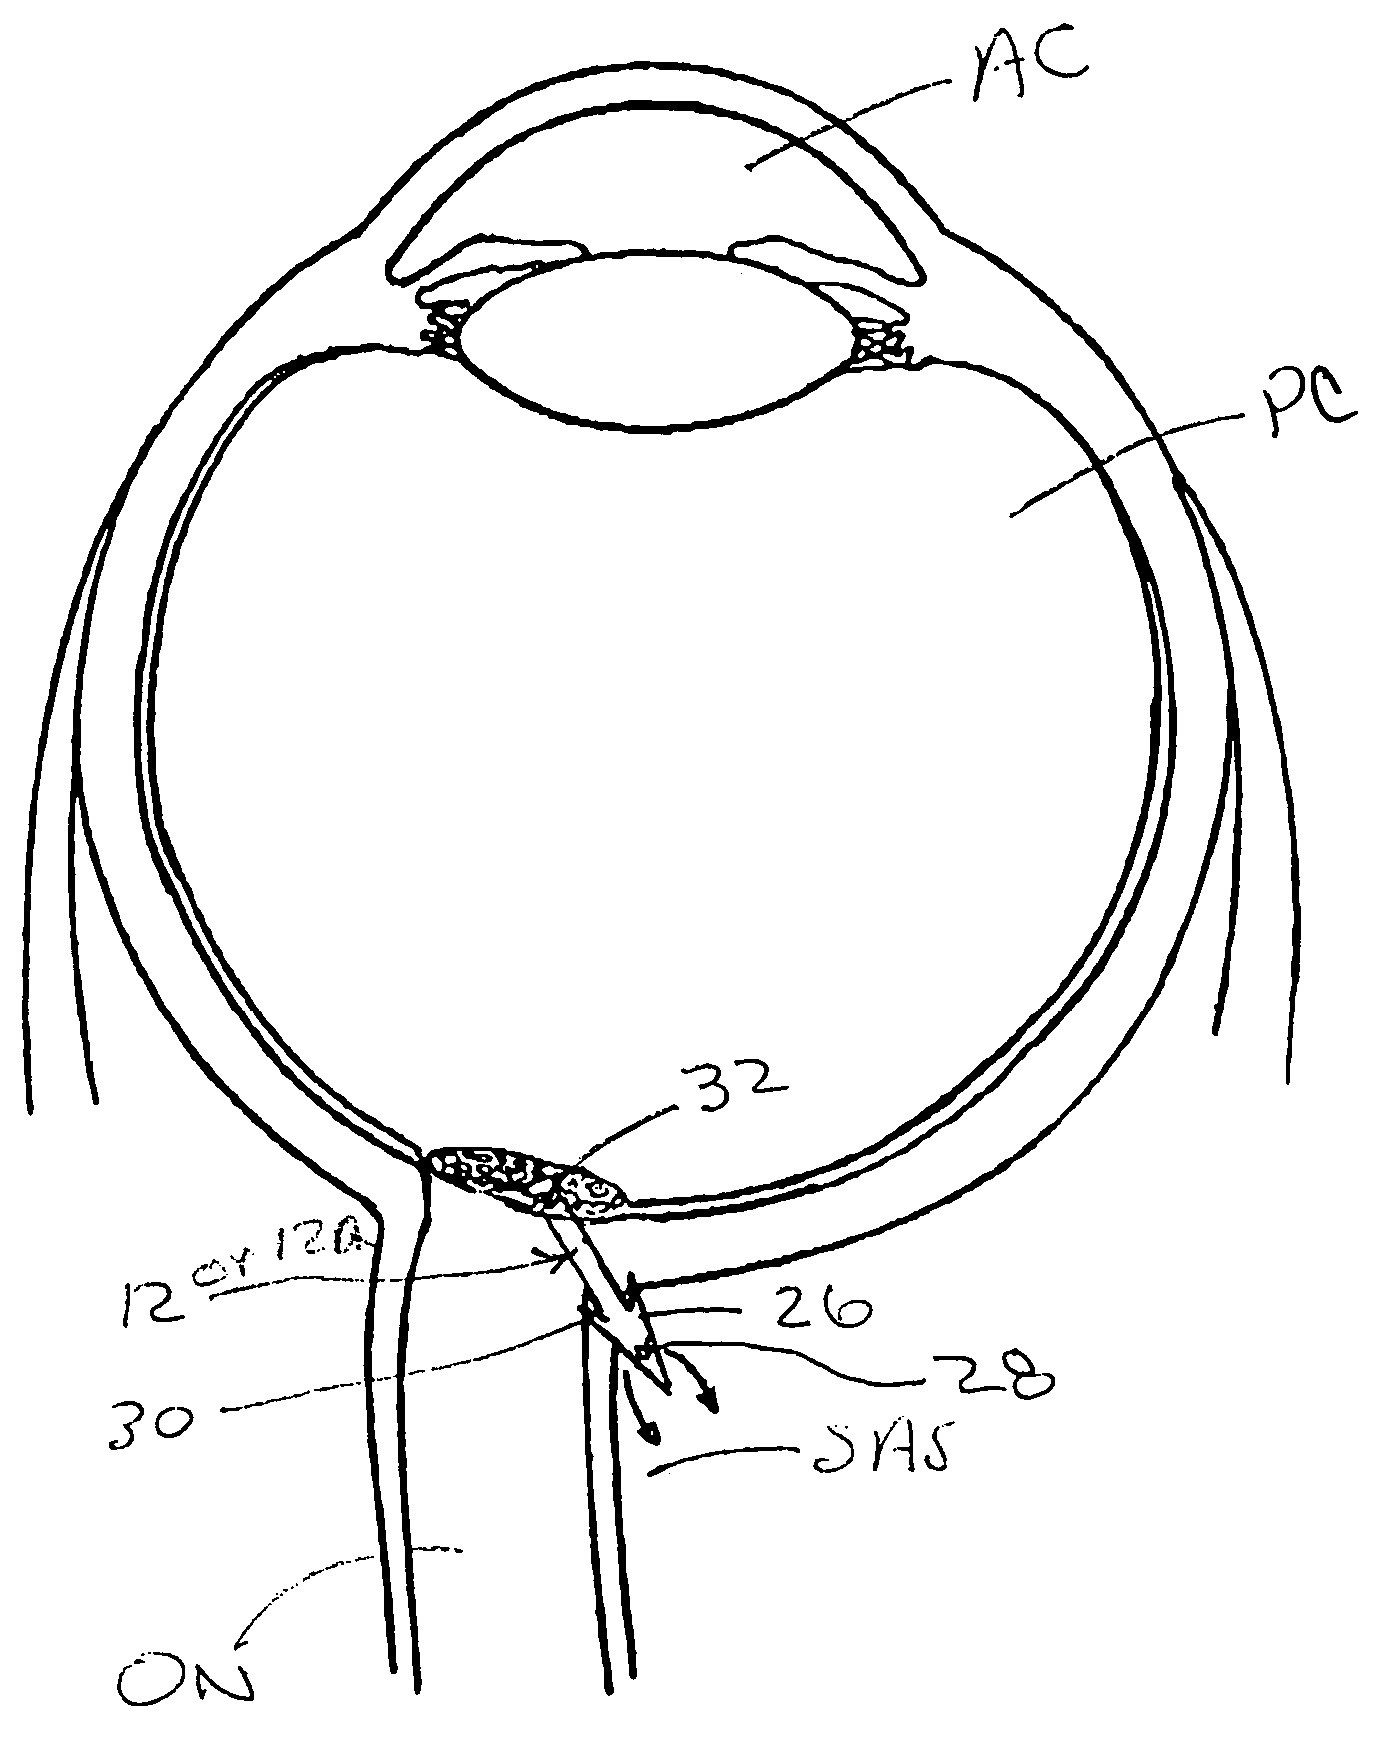 Methods and devices for draining fluids and lowering intraocular pressure